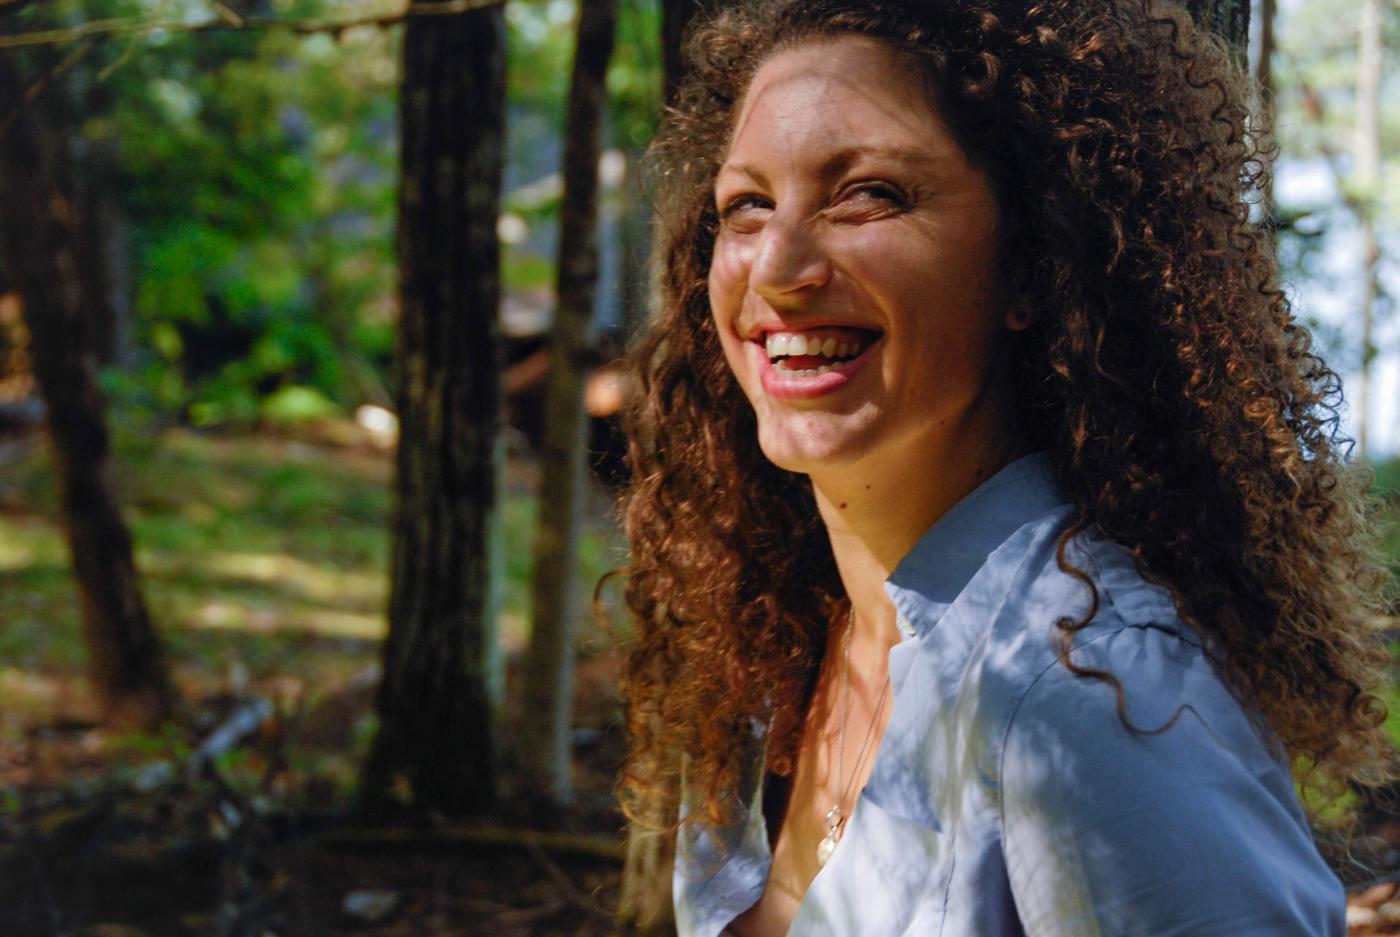 Carla has long curly hair. She smiles and wears a denim shirt, in the woods.